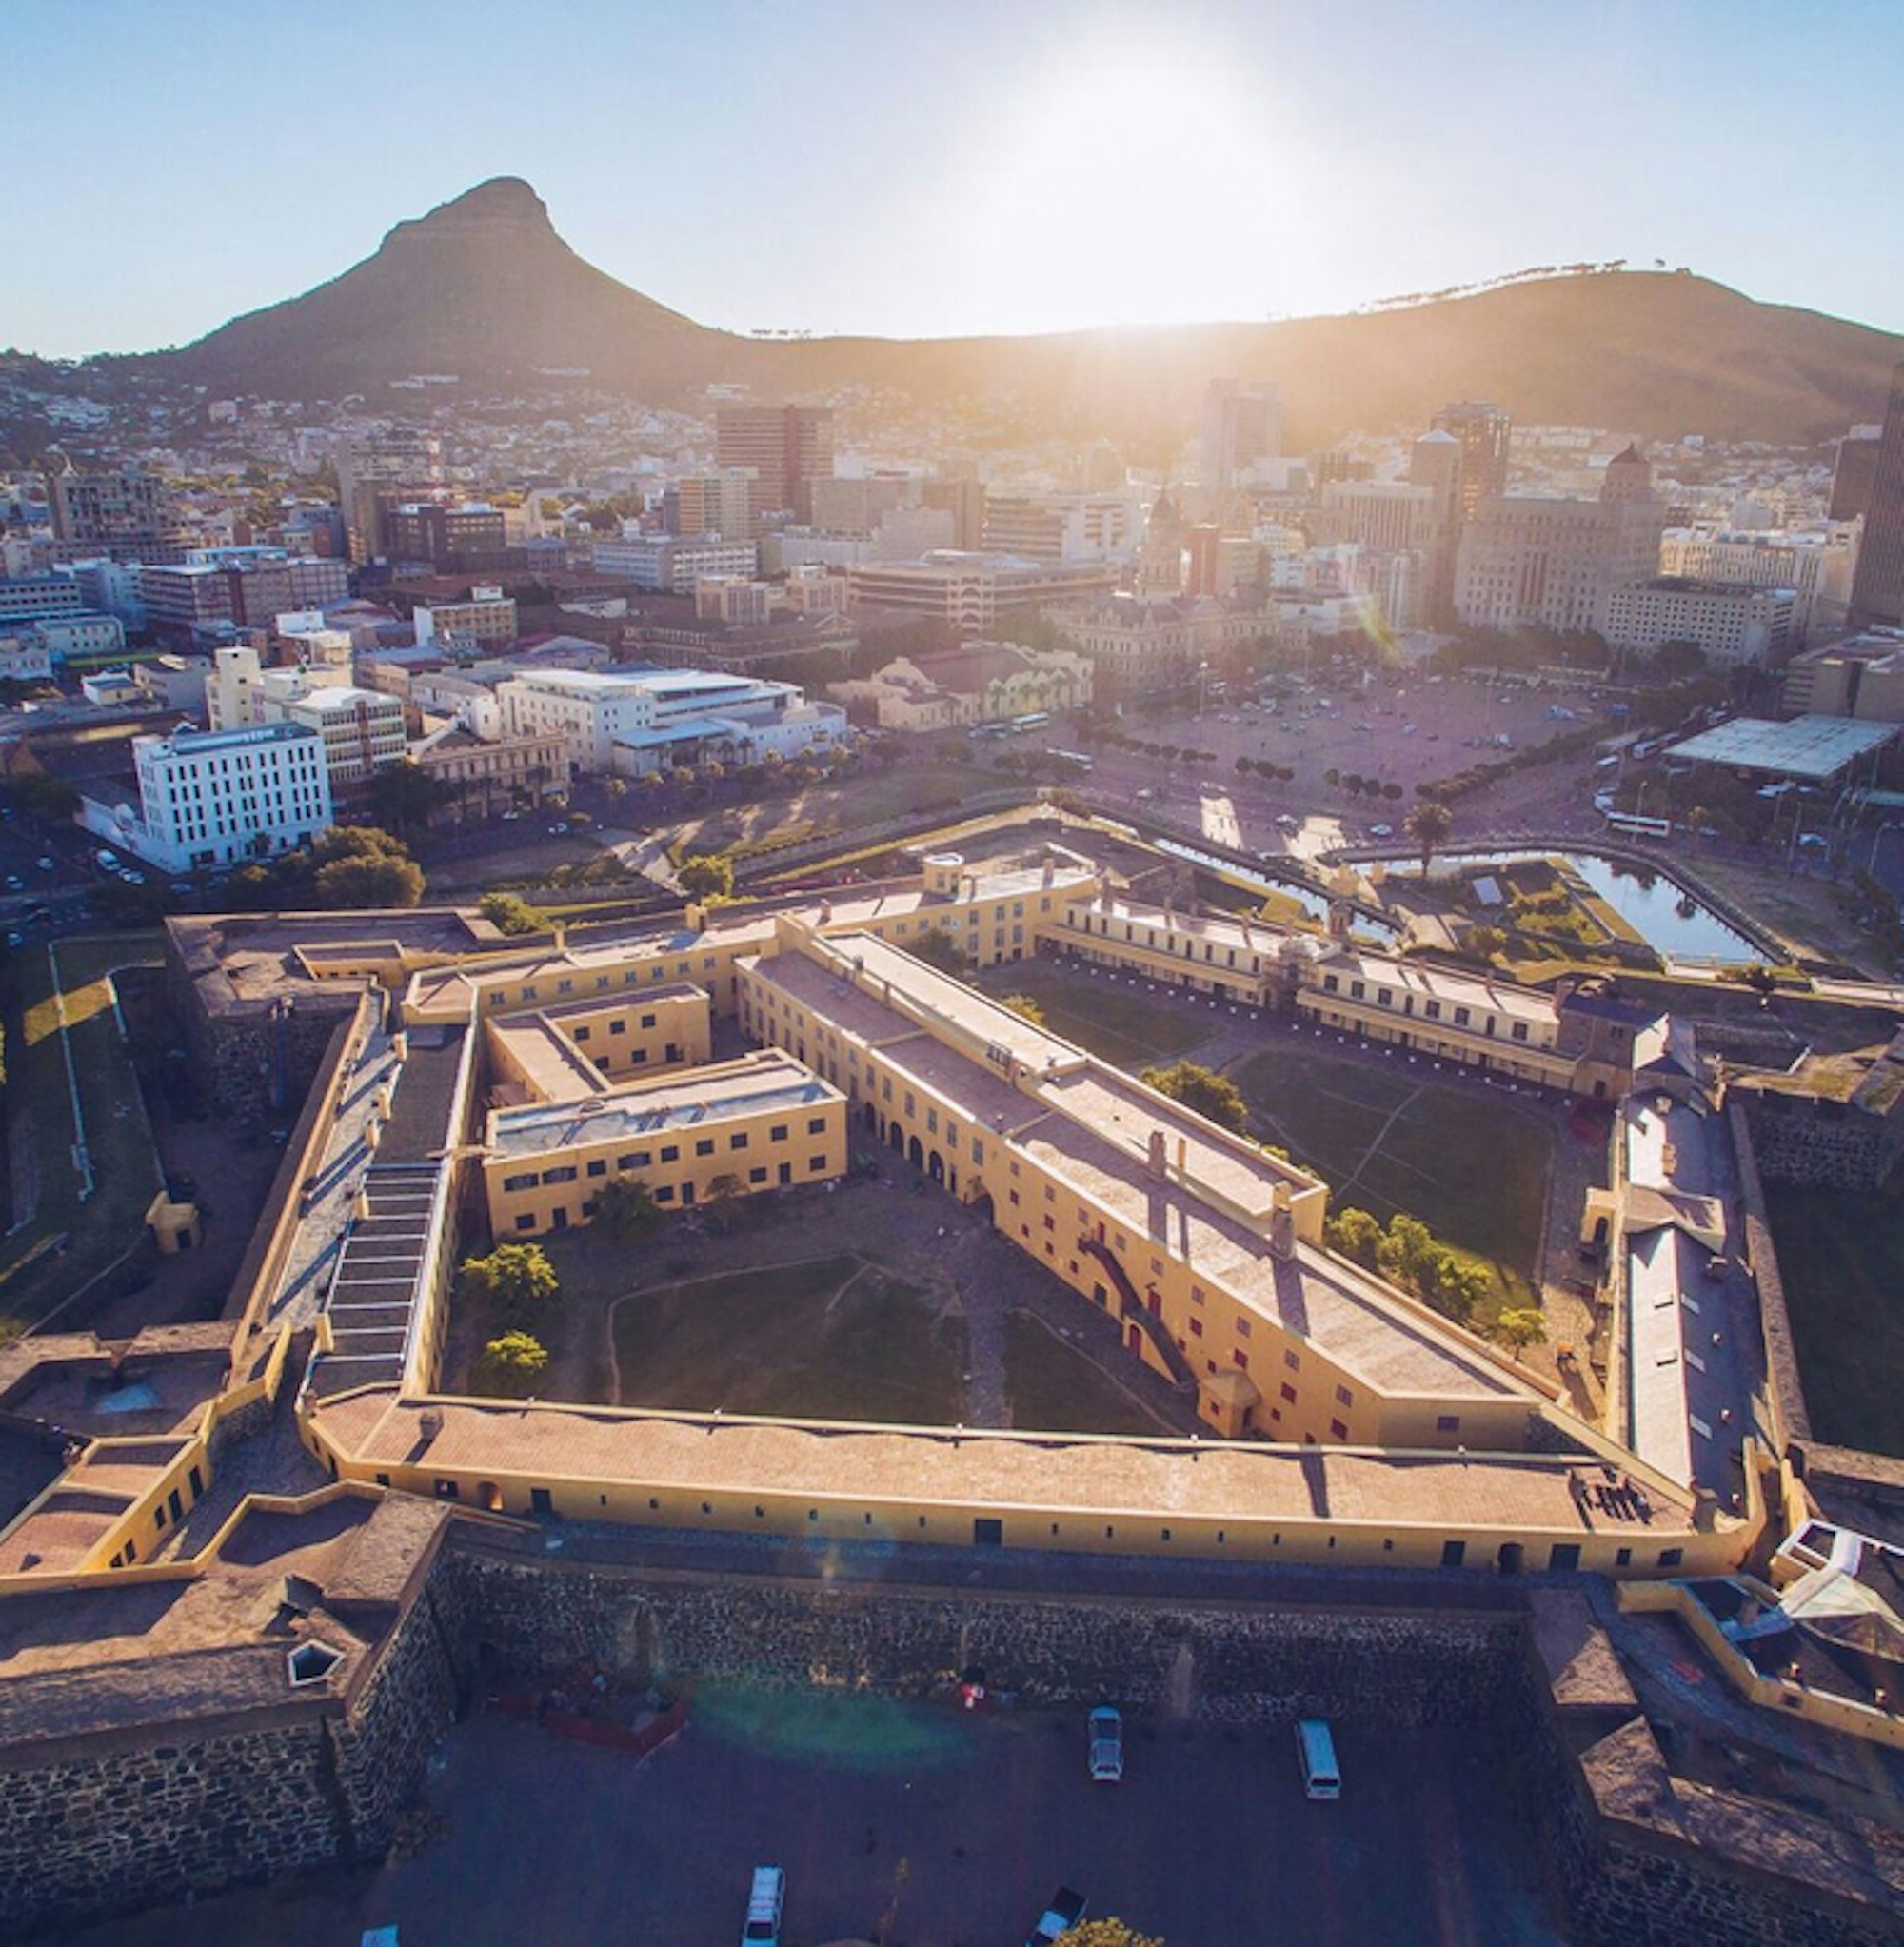 Aerial view of the Castle of Good Hope